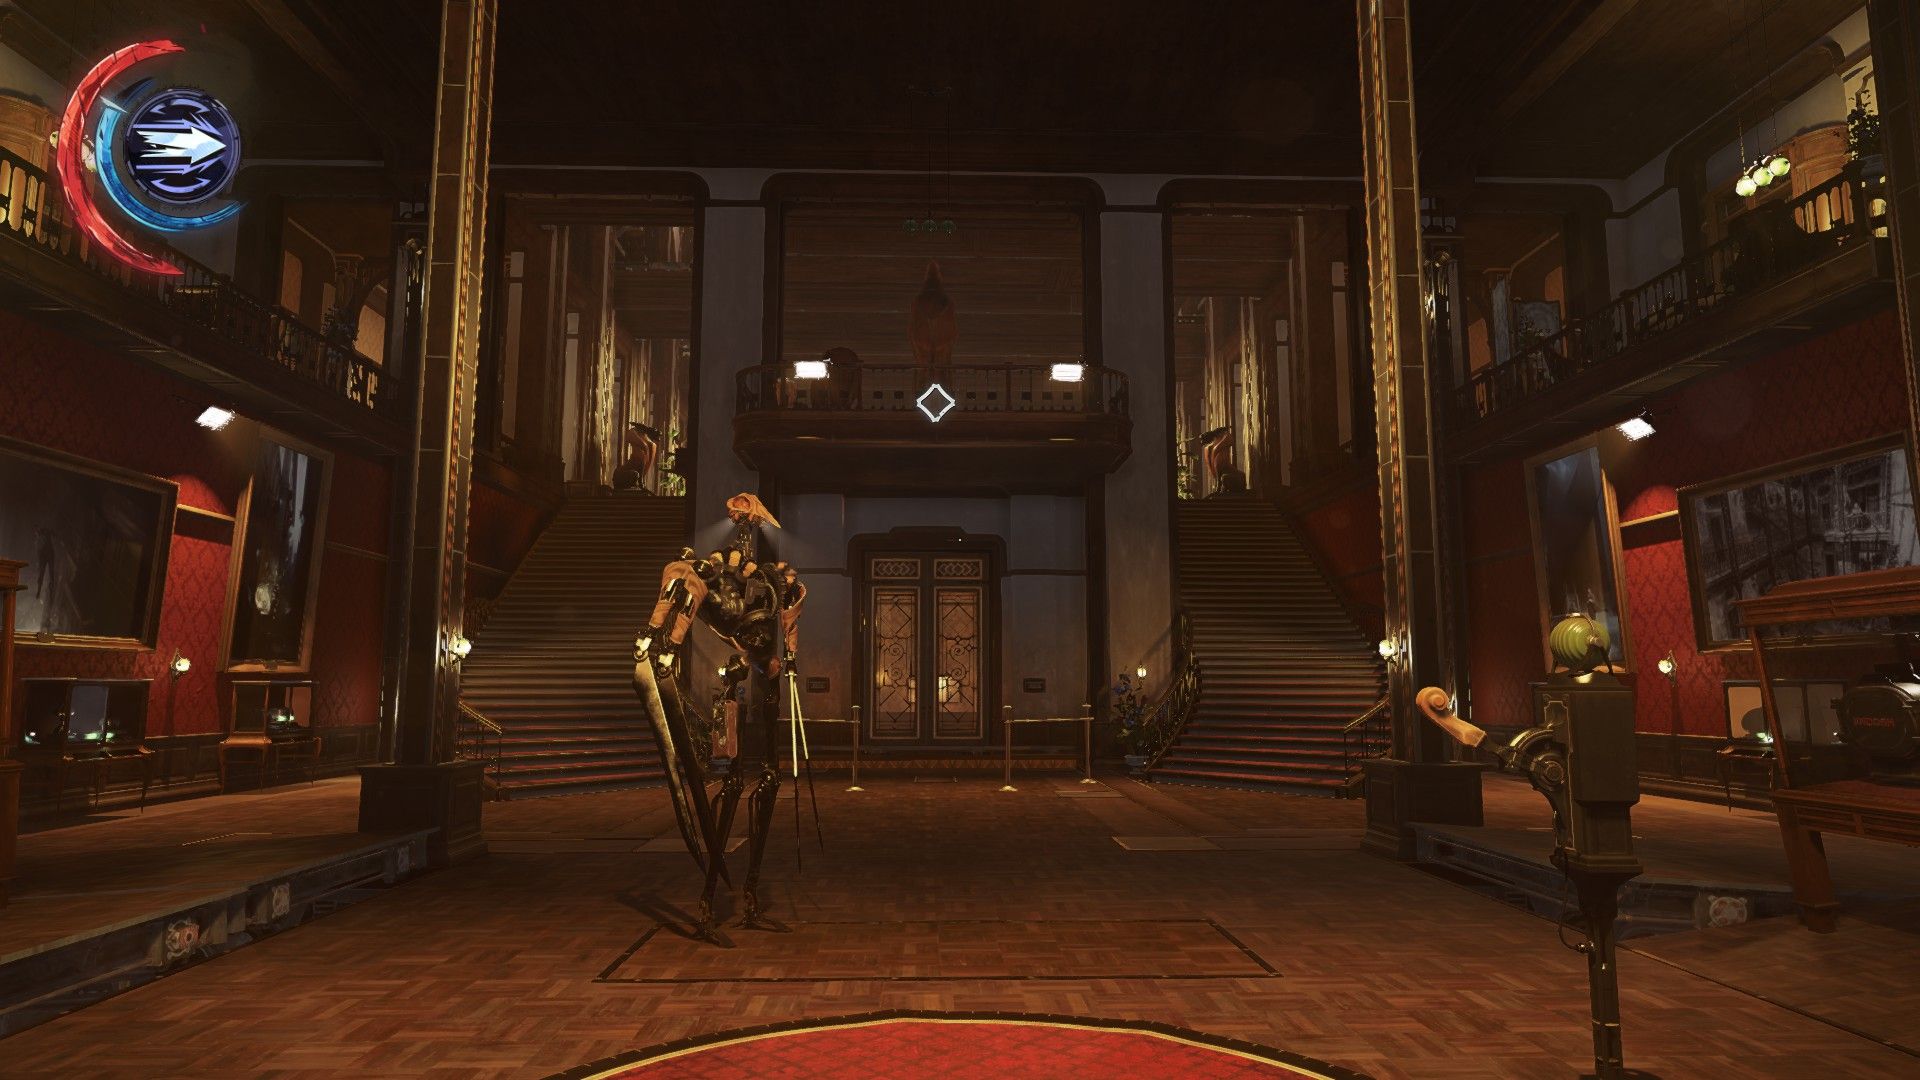 A few Dishonored 2 screenshots for you guys the game is so